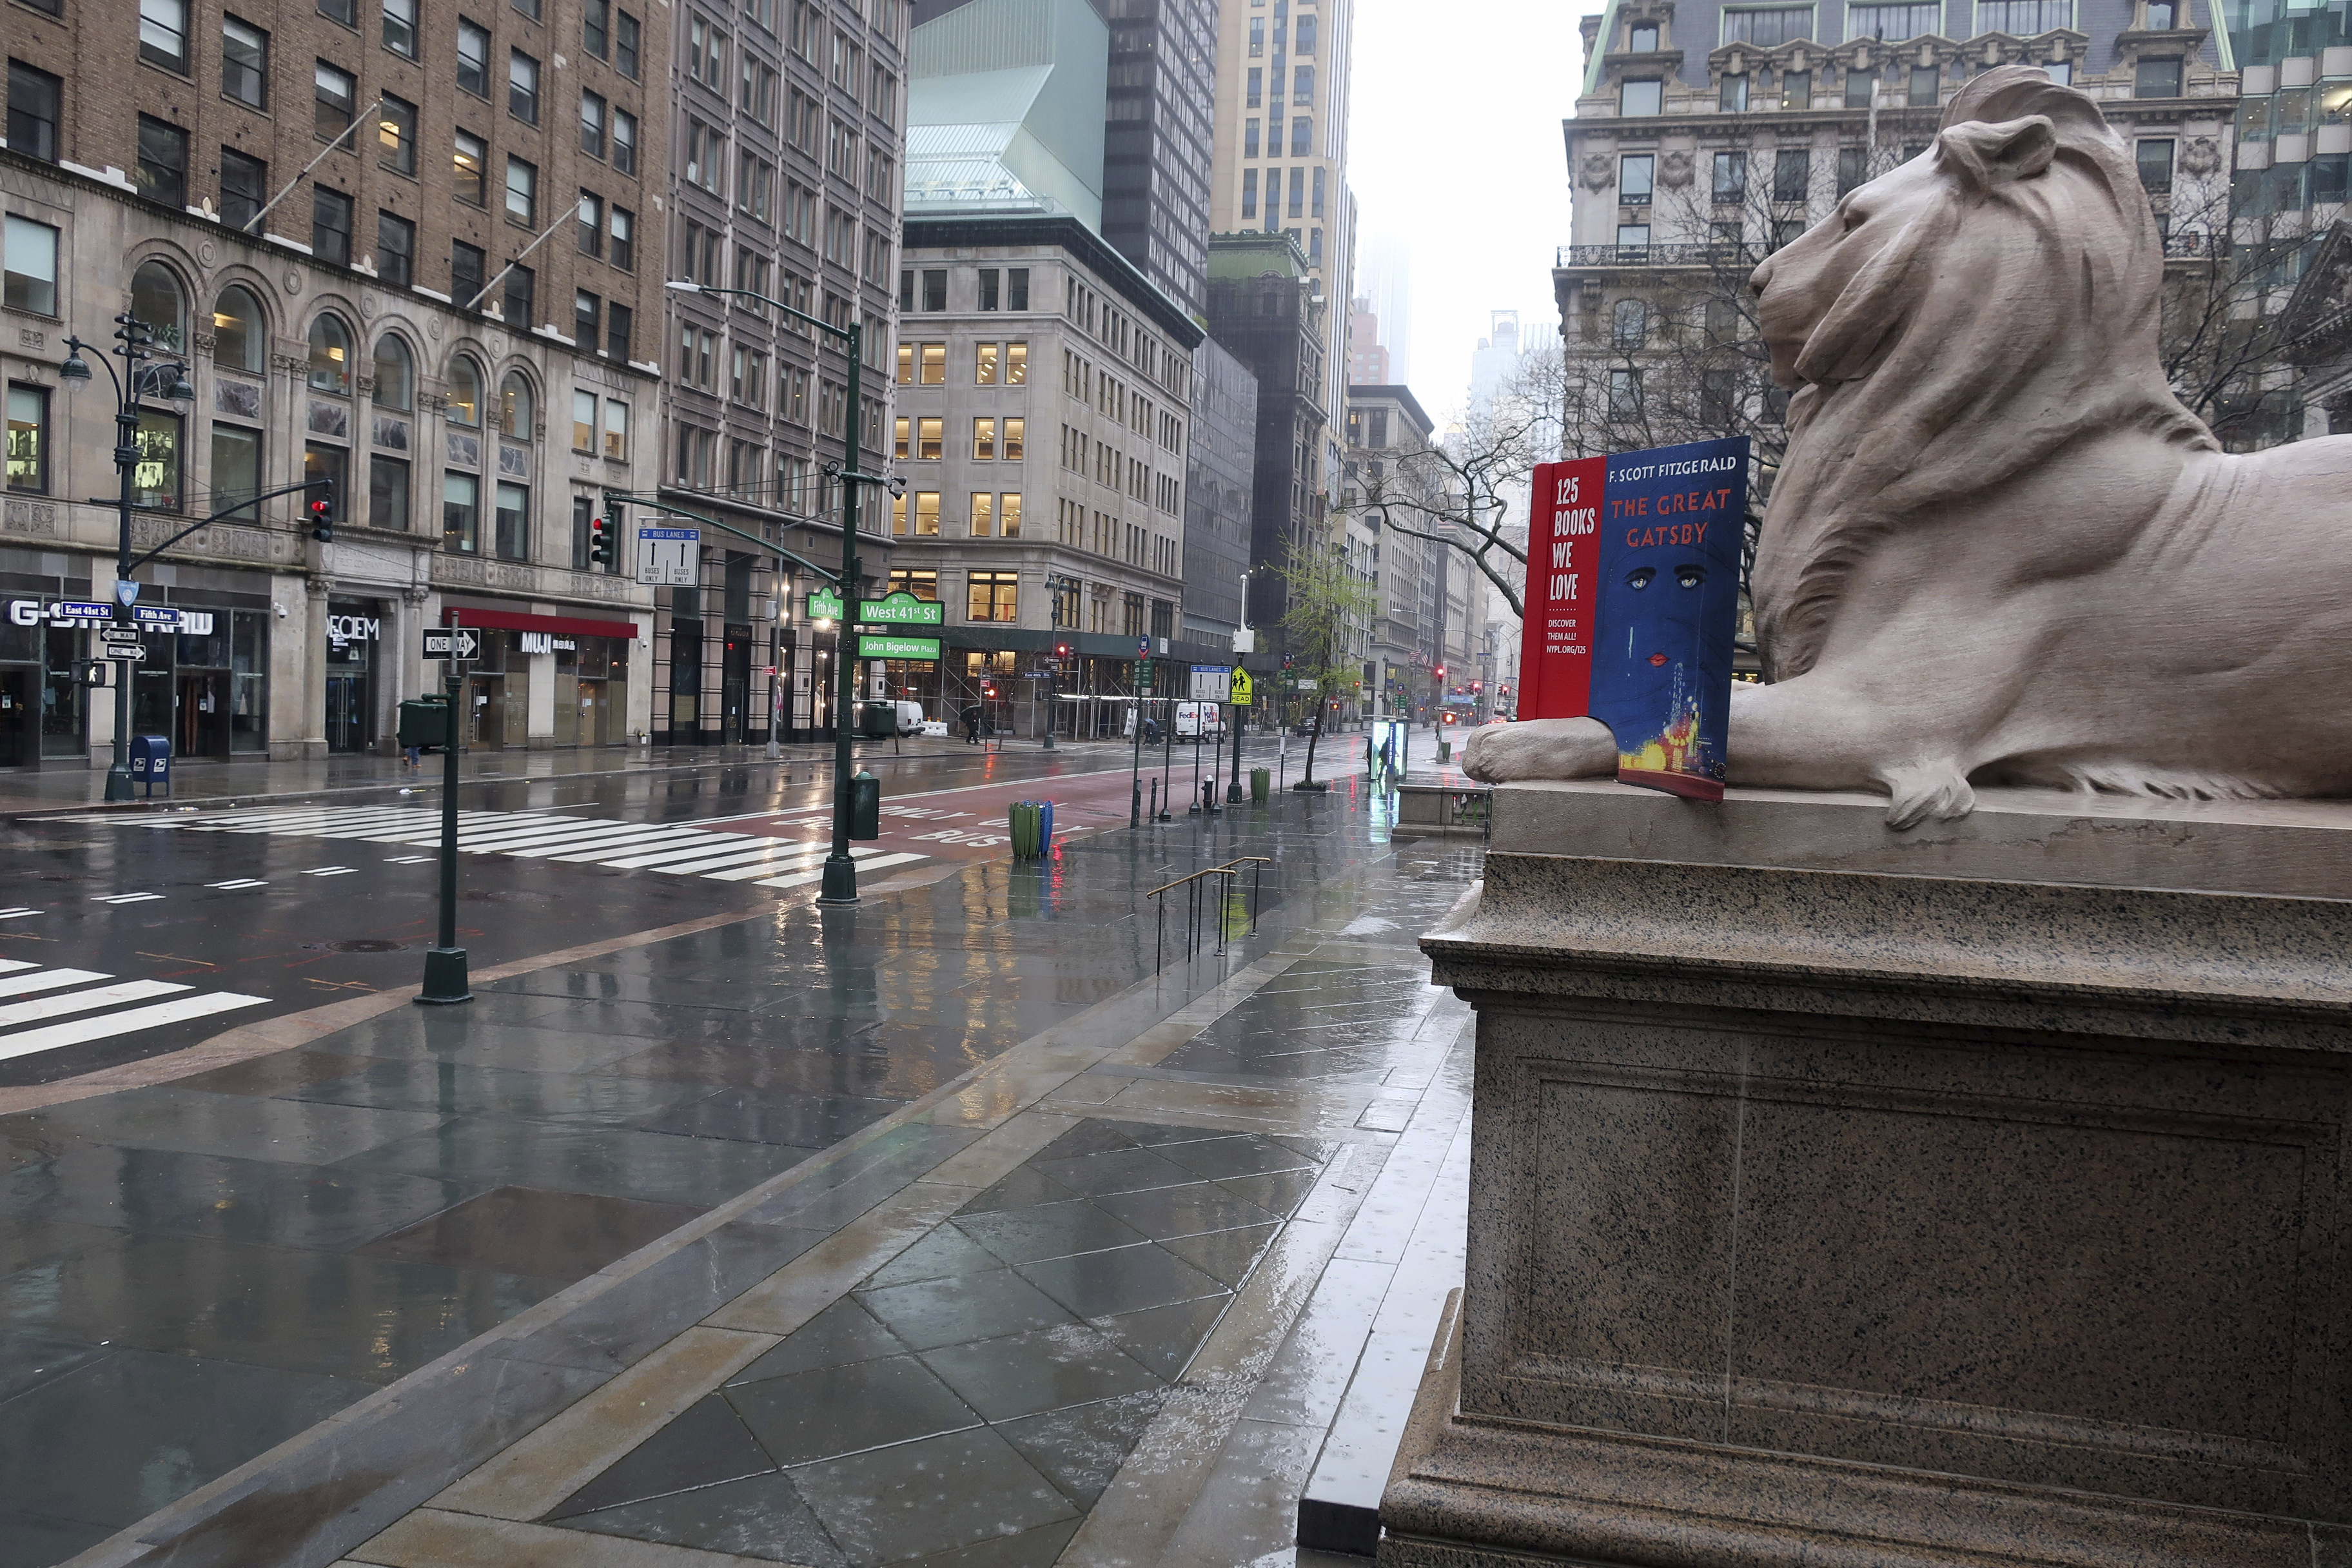 Fifth Avenue in front of the New York Public Library is empty on a rainy day in New York, Monday, April 13, 2020. Gov. Andrew Cuomo says New York's death toll from coronavirus has topped 10,000, with hospitals still seeing 2,000 new patients a day. (AP Photo/Ted Shaffrey)